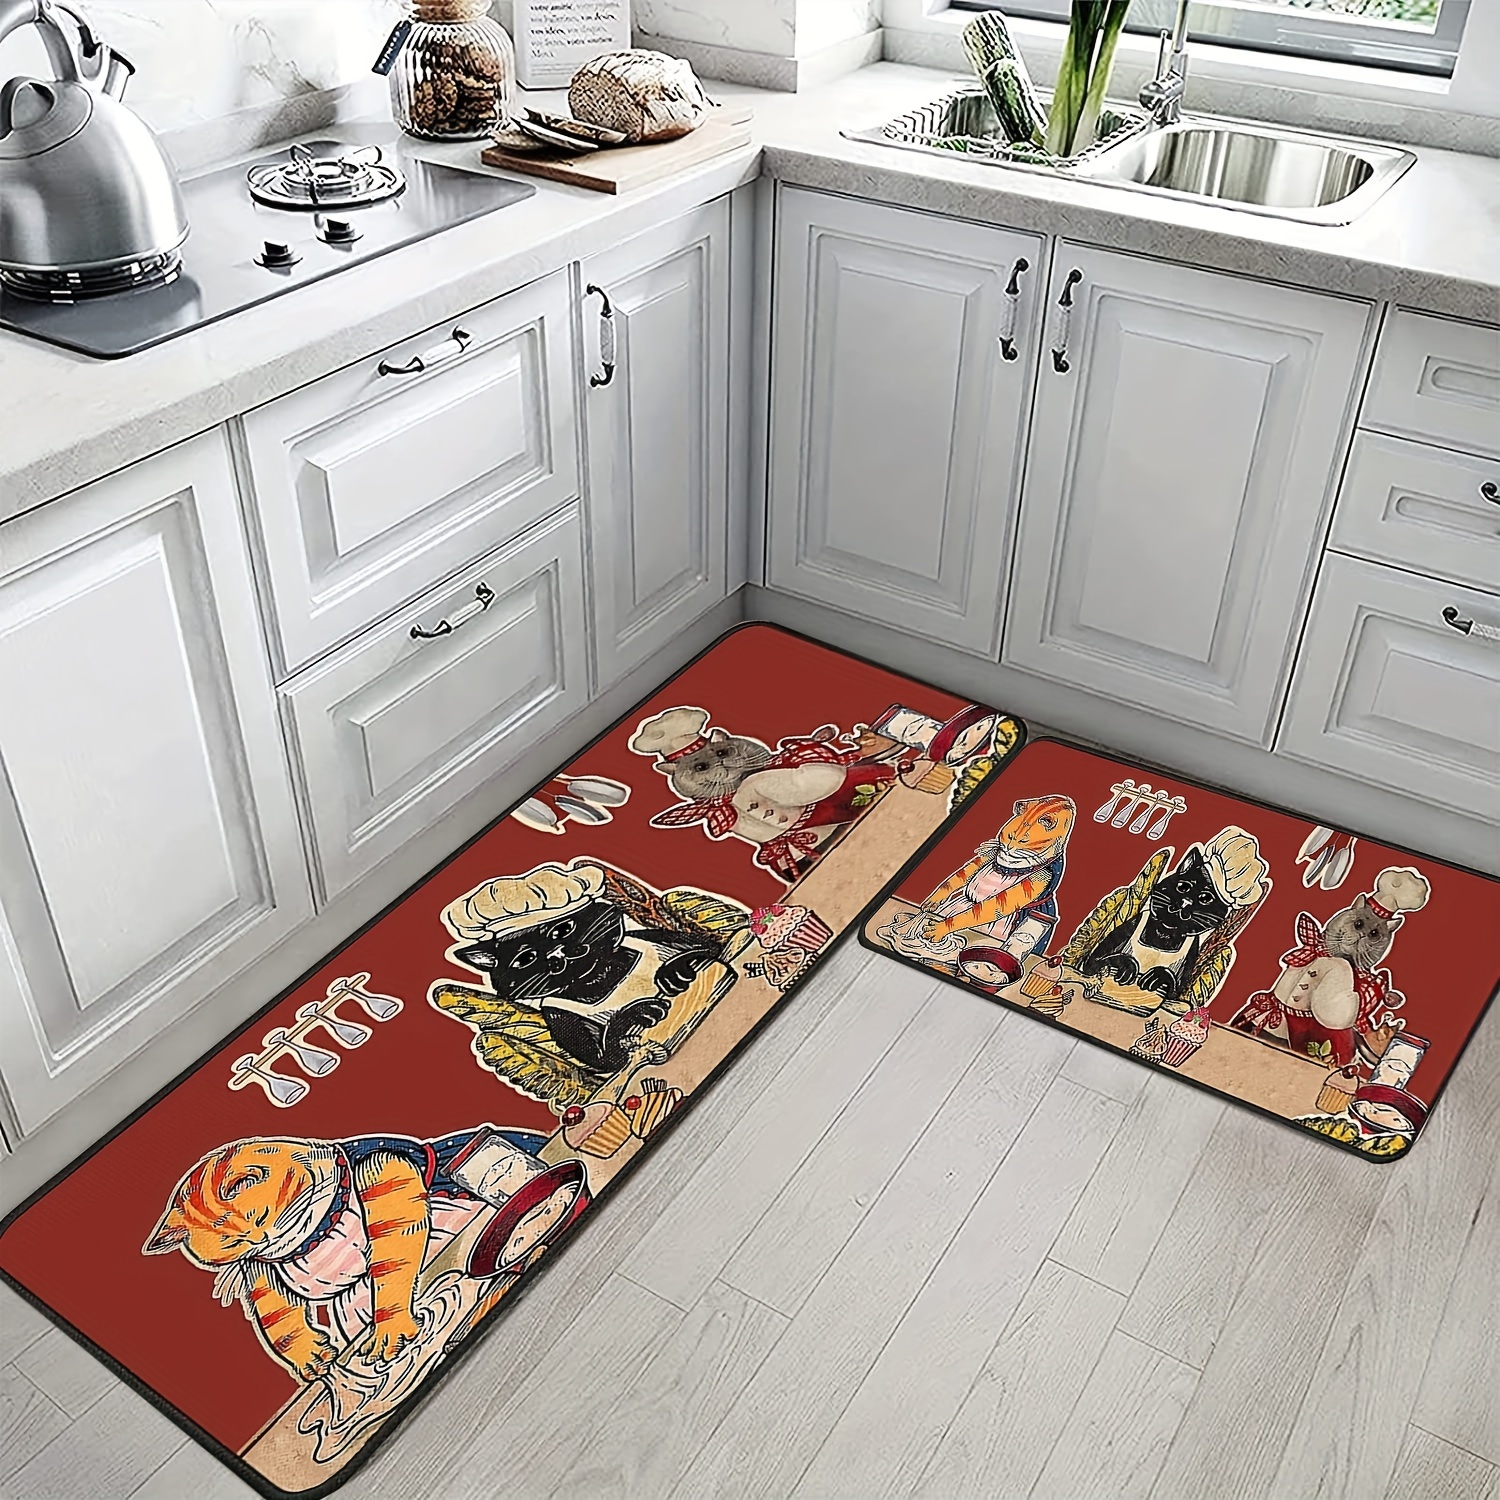 Chef Cat Pattern Kitchen Rugs, Vintage Flannel Absorbent Non Slip Cushioned  Rugs, Stain Resistant Waterproof Long Strip Floor Mat, Comfort Standing Mats,  Living Room Bedroom Bathroom Kitchen Sink Laundry Office Area Rugs